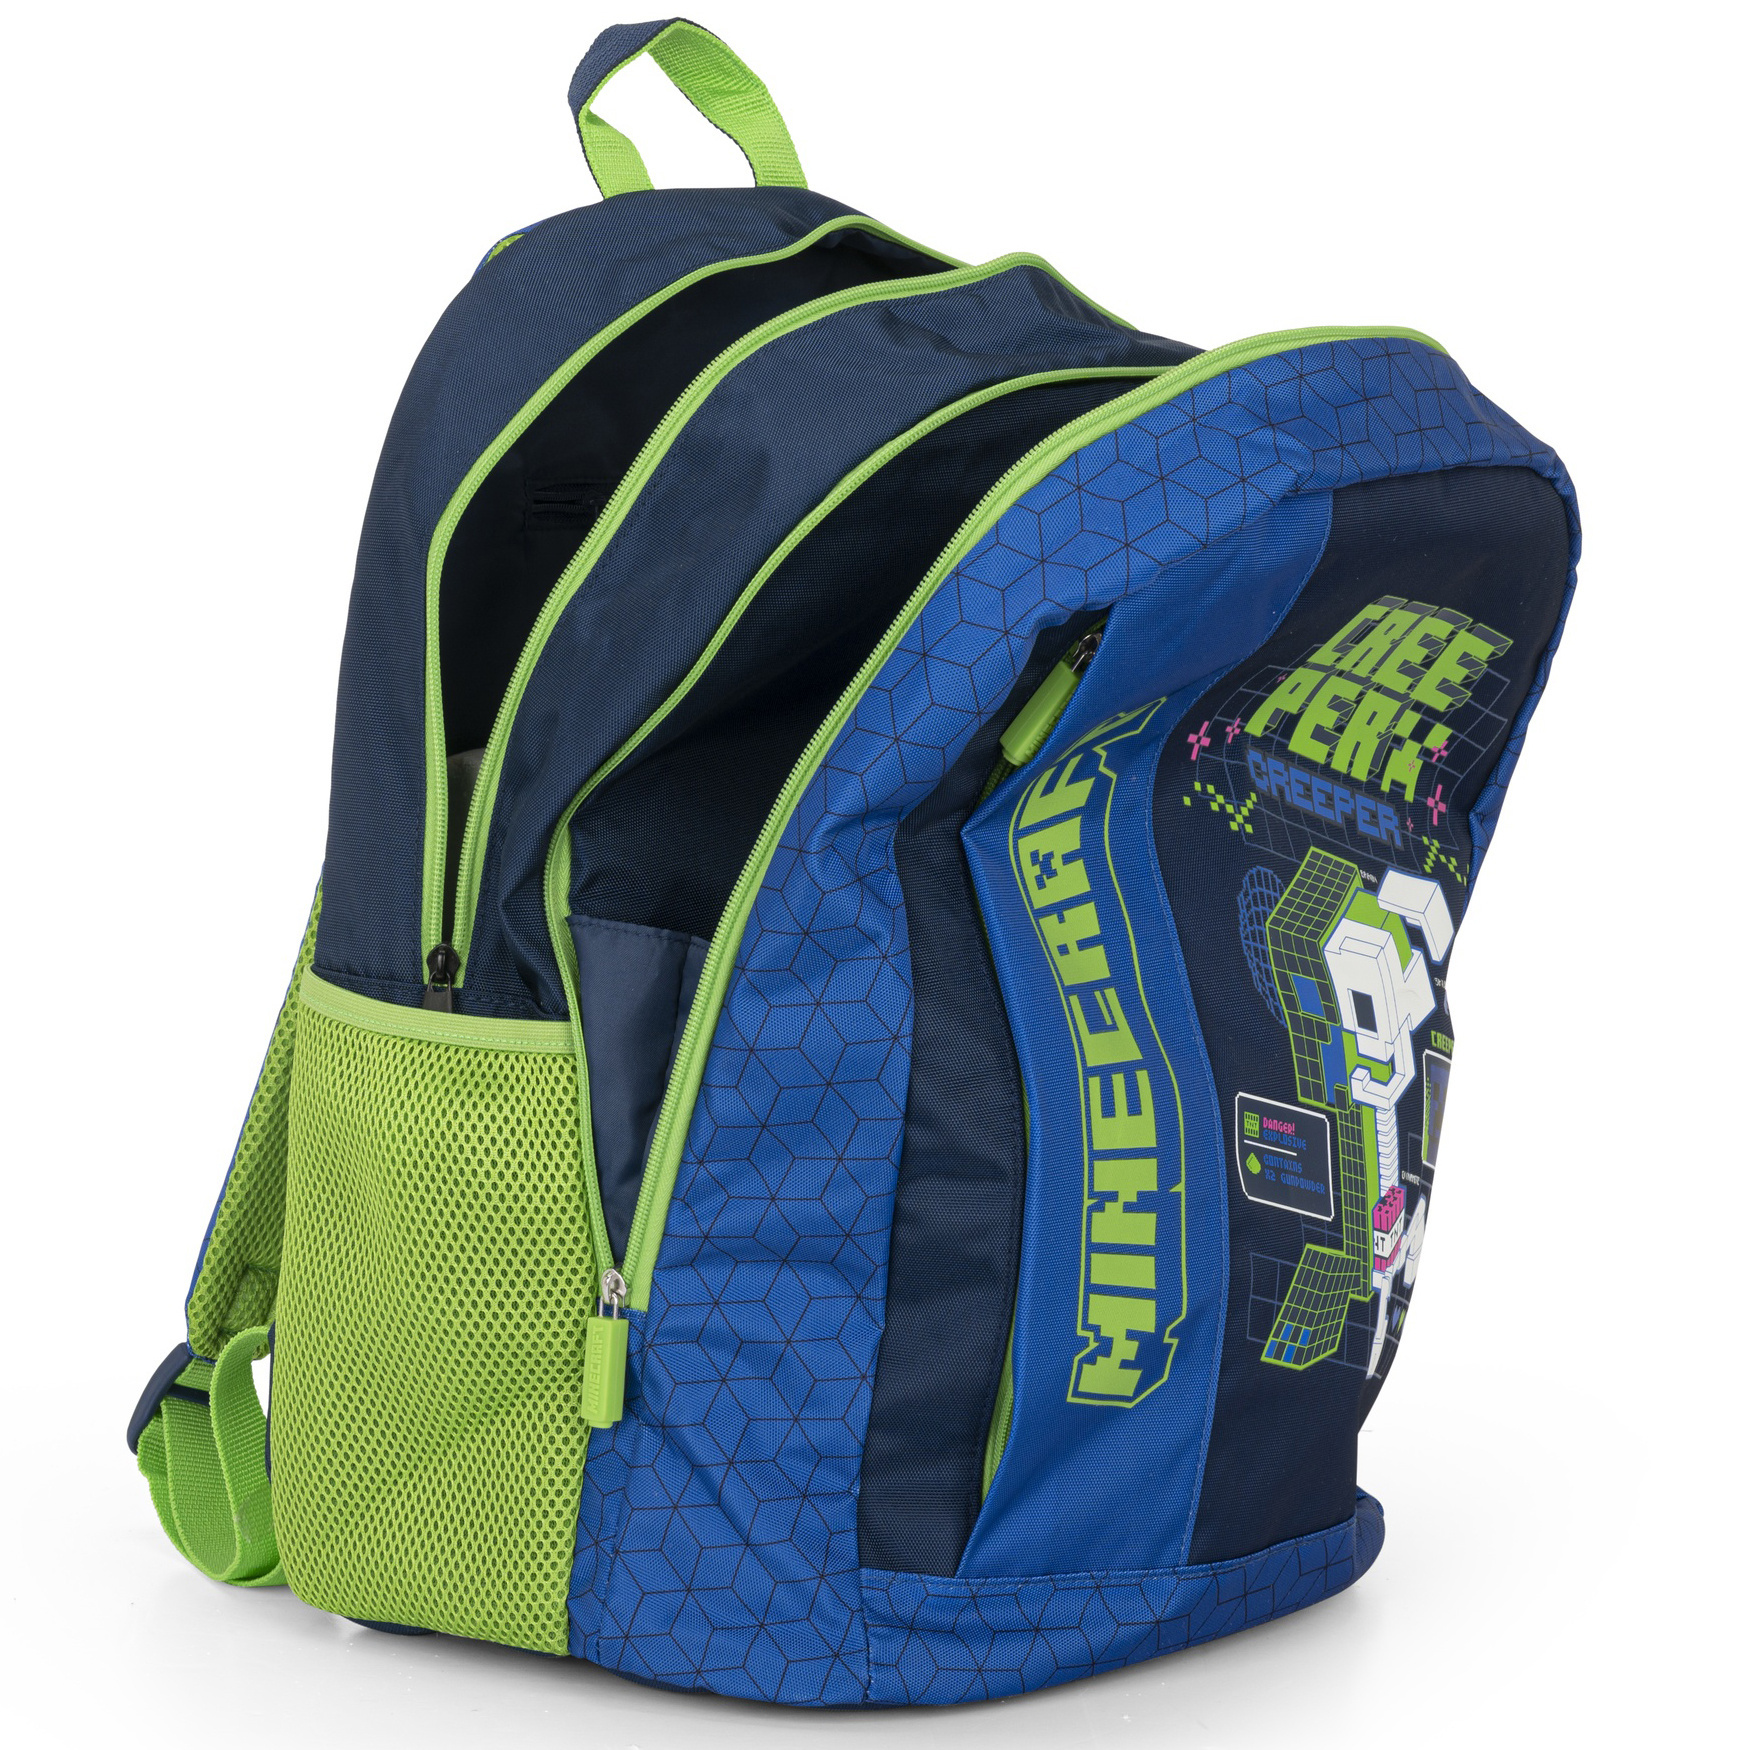 Minecraft Backpack, Creeper - 43 x 31 x 22 cm - Polyester